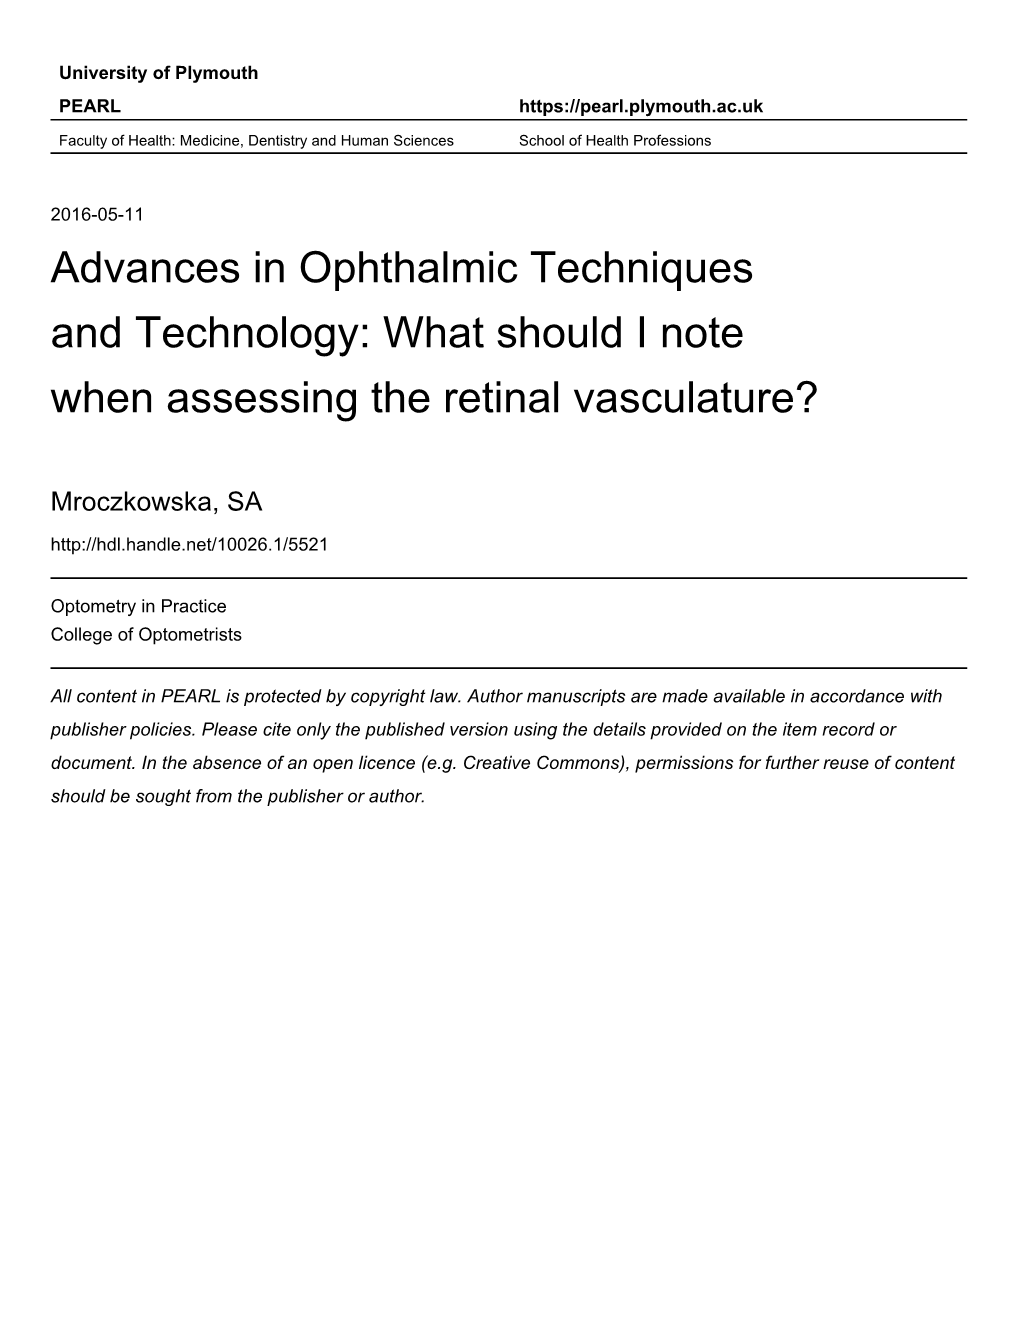 What Should I Note When Assessing the Retinal Vasculature?